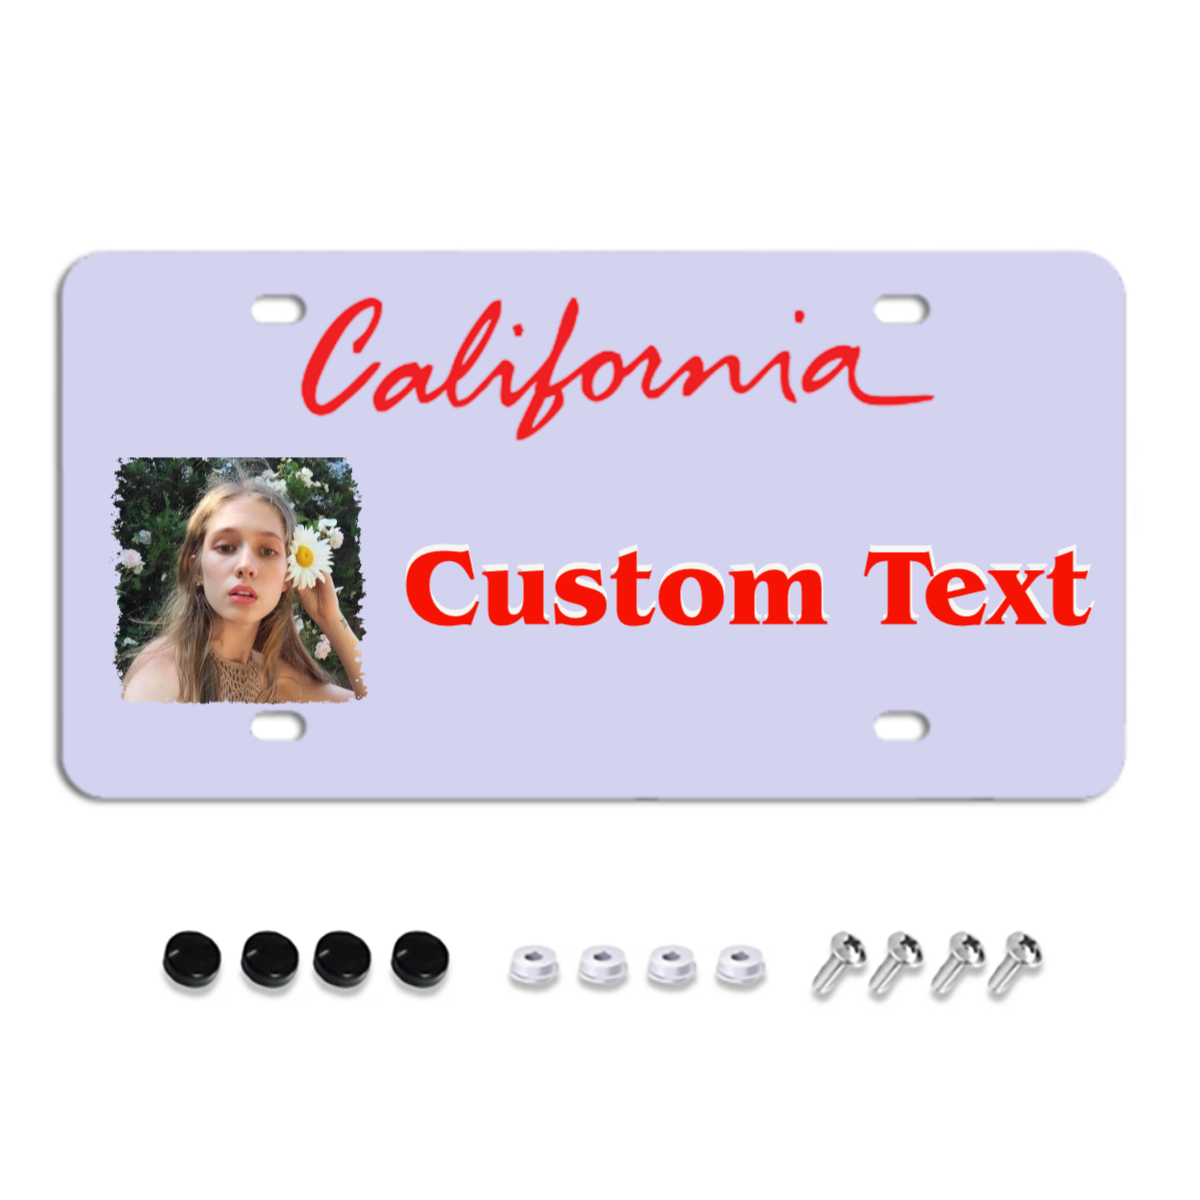 California Custom License Plates, Personalized Photo & Text & Background